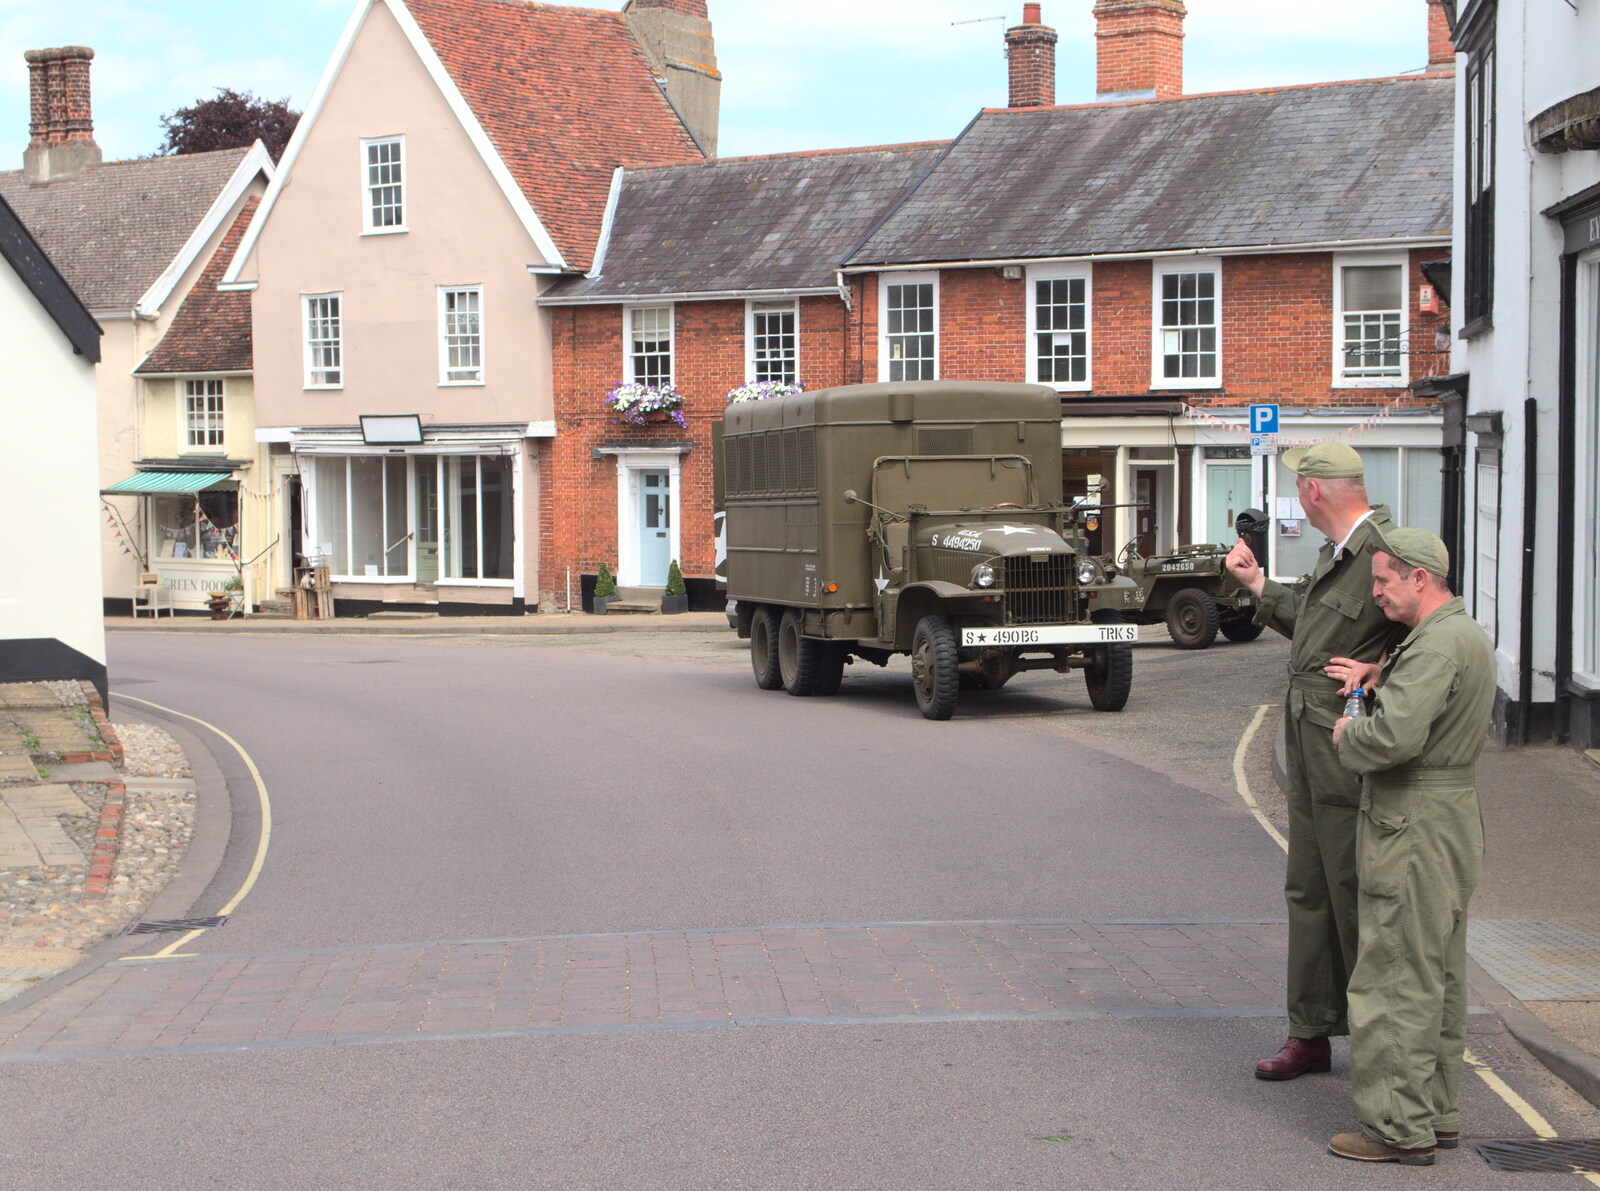 This could be an actual 1940s photo from A 1940's Takeover, Eye, Suffolk - 8th August 2015